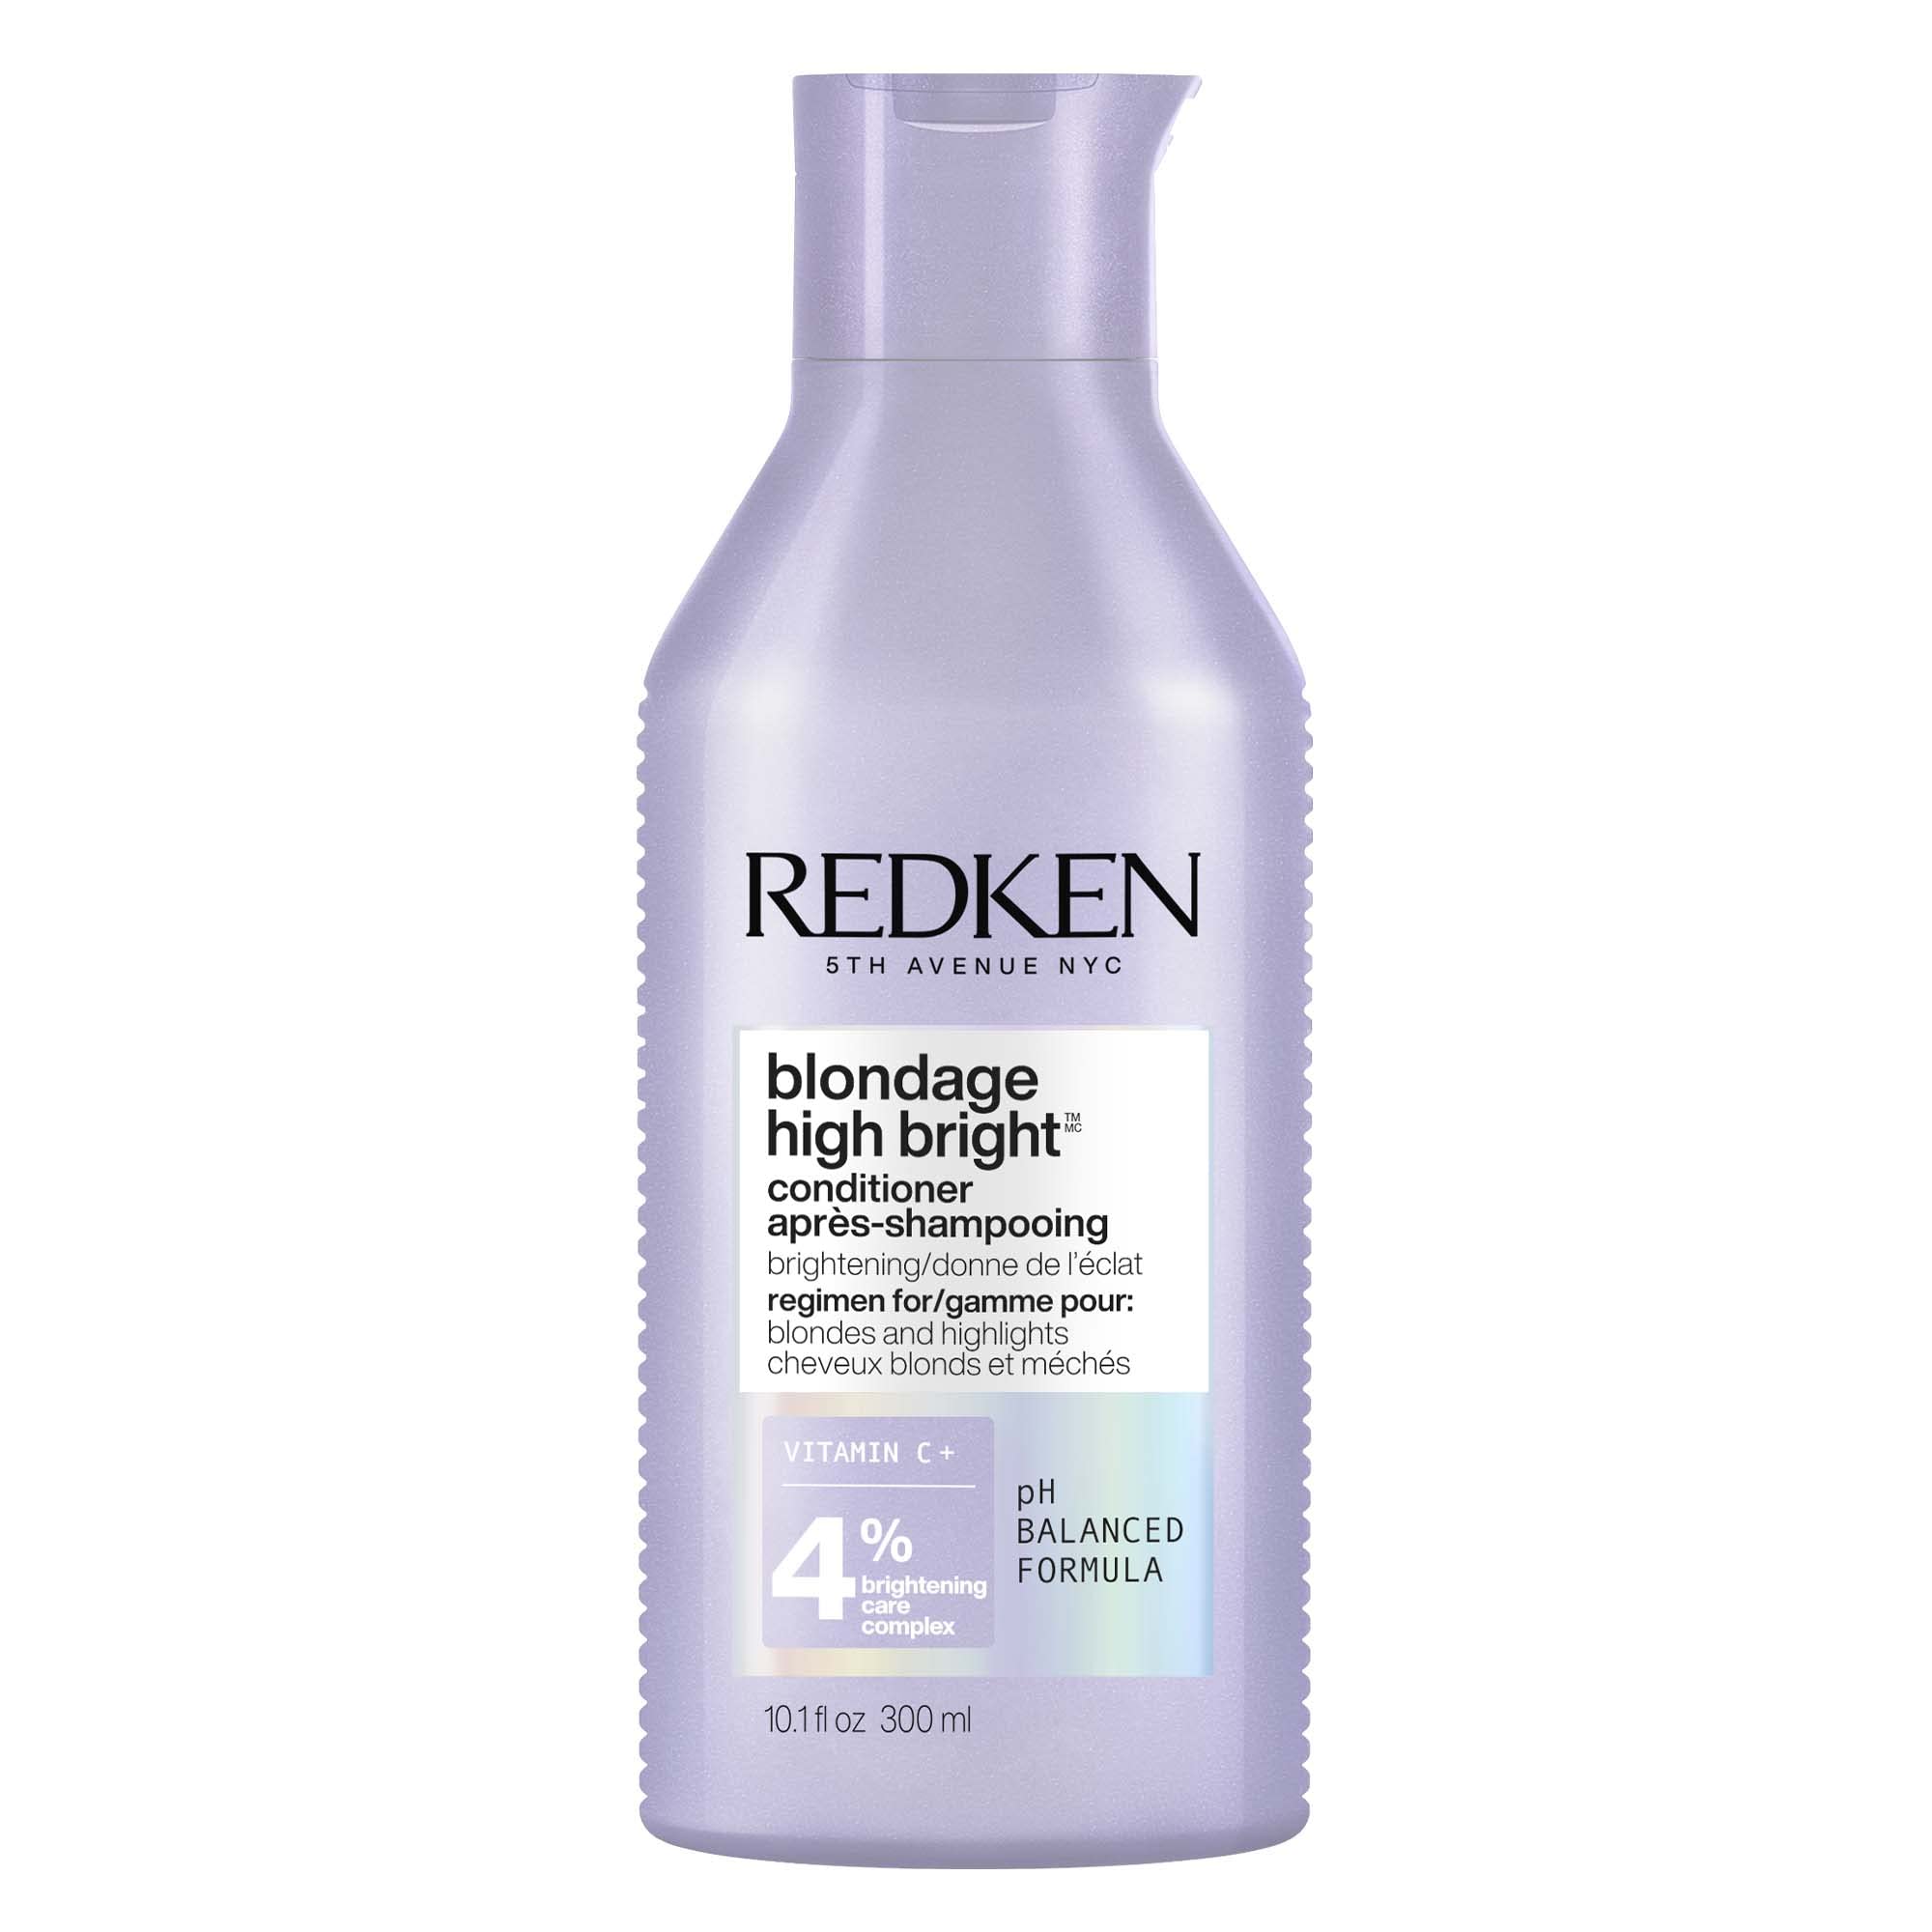 Redken Blondage High Bright Conditioner, Brightens and Lightens Color-Treated and Natural Blonde Hair Instantly, Infused with Vitamin C,300 ml.